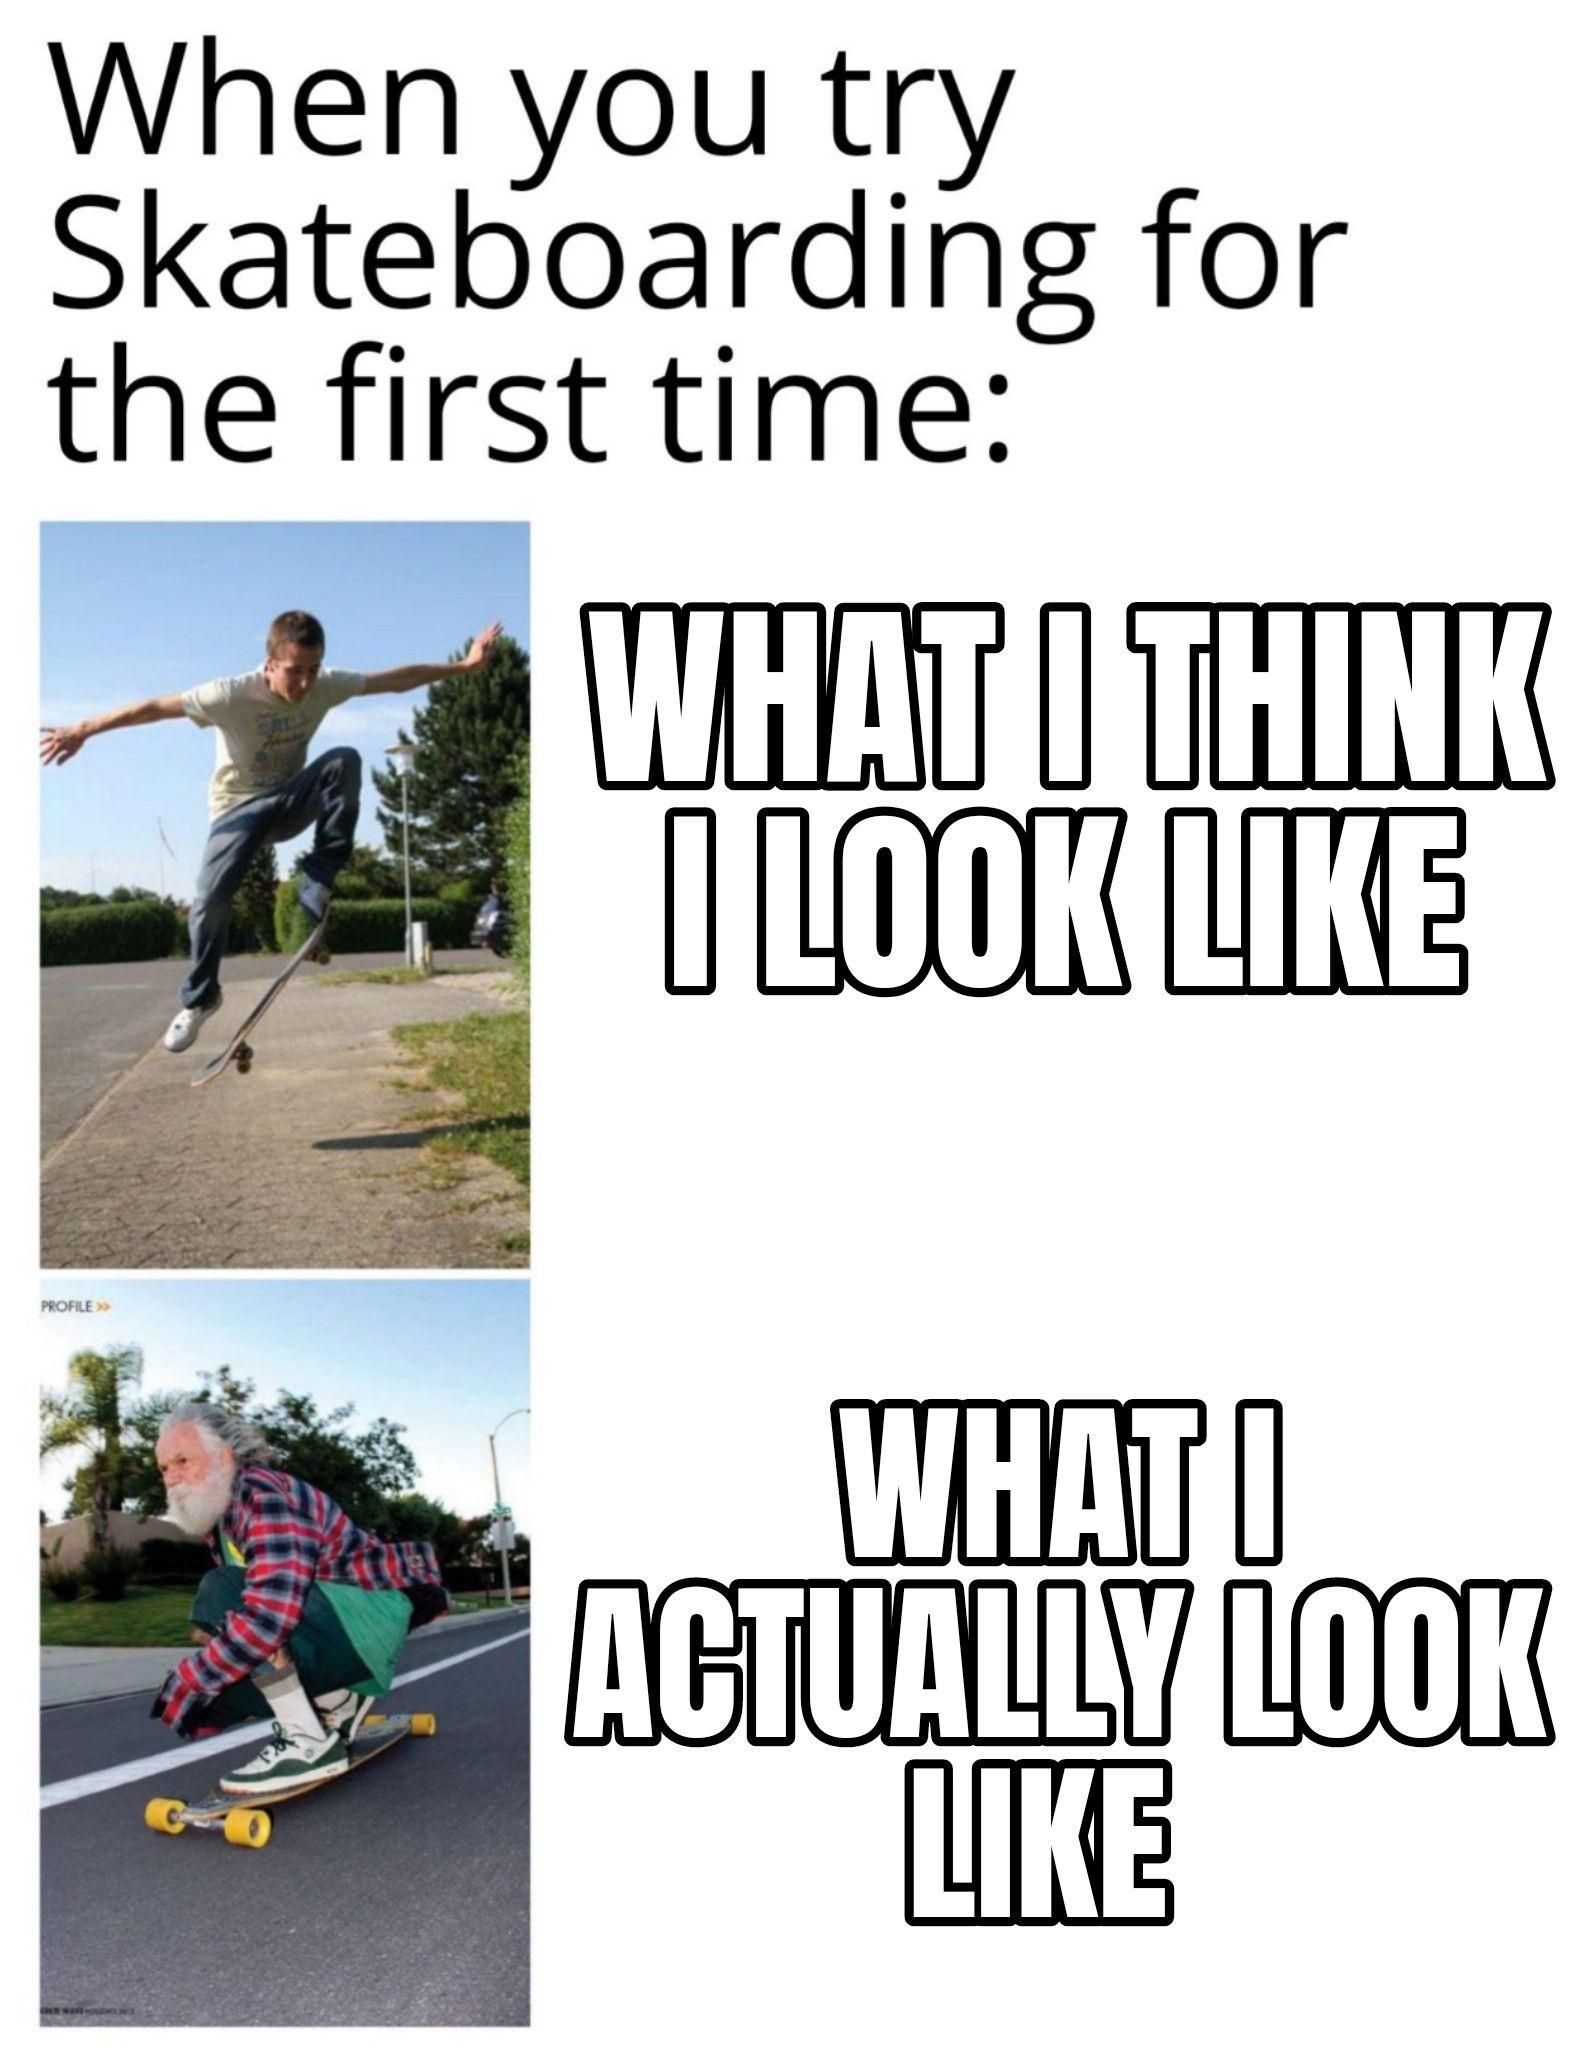 When you try
Skateboarding for
the first time:
PROFILE >>
Falt
WHAT I THINK
I LOOK LIKE
WHAT I
ACTUALLY LOOK
LIKE